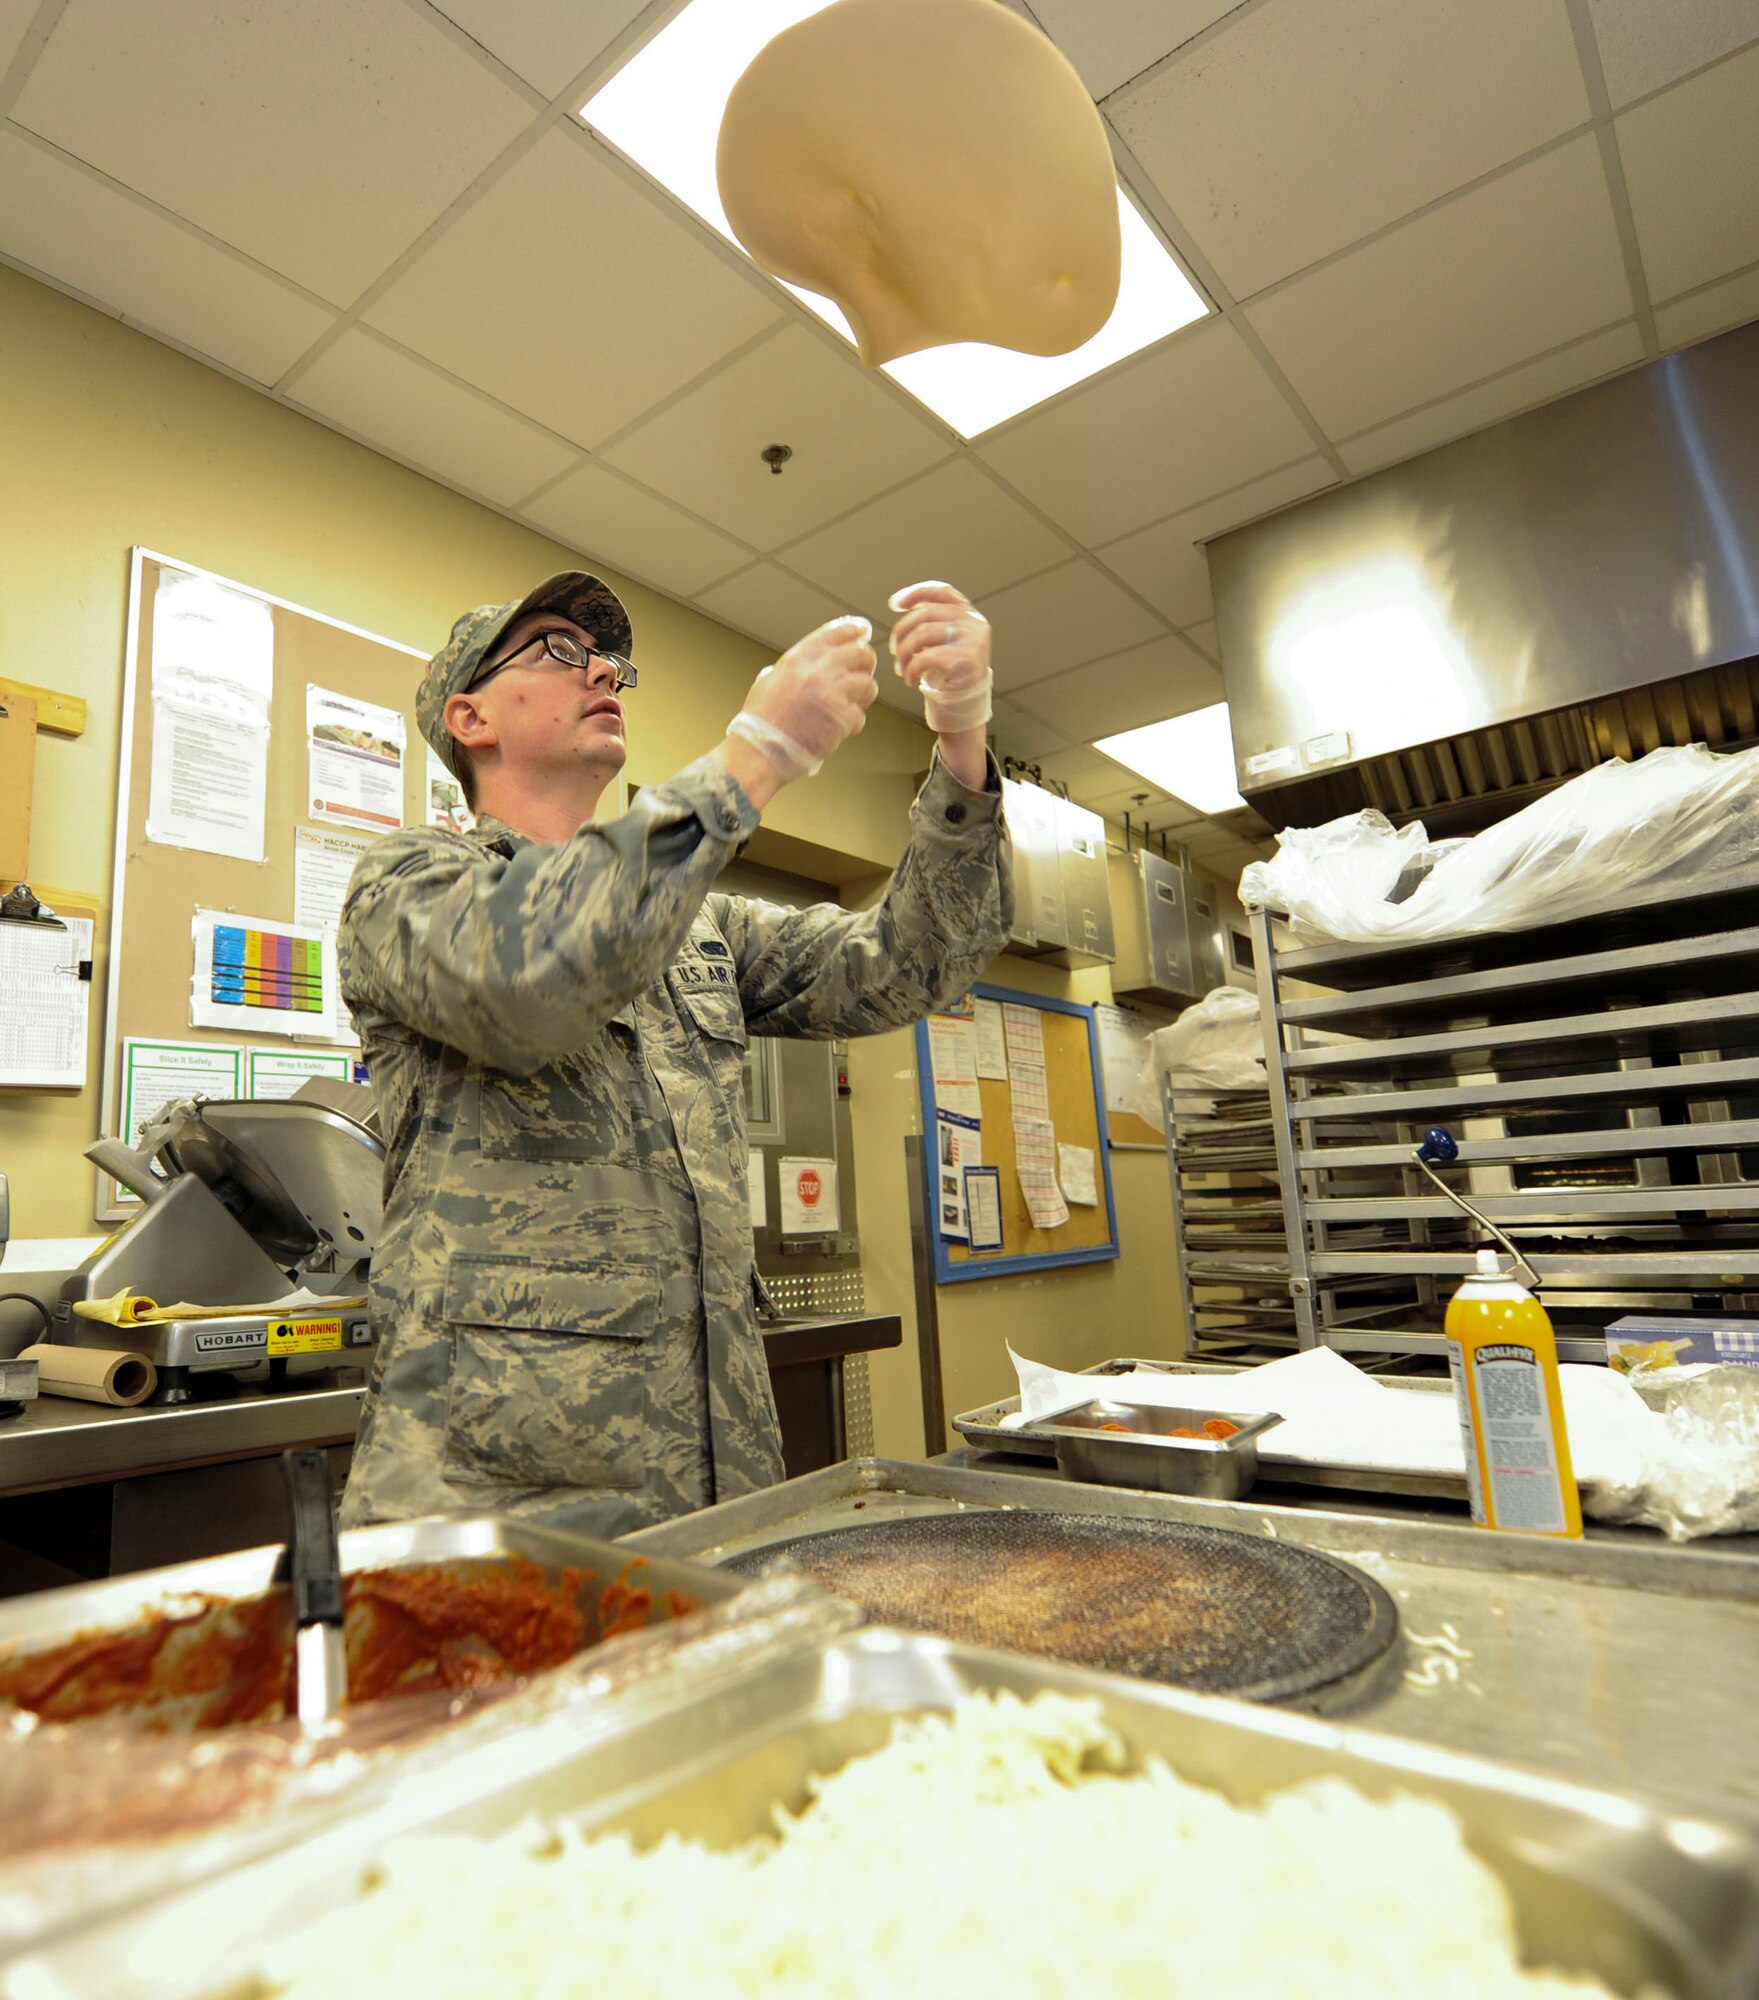 Senior Airman Boyd Cox, a food service journeyman assigned to the 28th Force Support Squadron tosses pizza dough in the air to prepare for the lunch rush at Ellsworth Air Force Base, S.D., Oct. 6, 2016. The Raider Café, Ellsworth’s dining facility, was recently nominated for the coveted John L. Hennessy award at the major command level, and will soon compete at the Air Force level within the next month. (U.S. Air Force photo by Airman 1st Class Randahl J. Jenson)